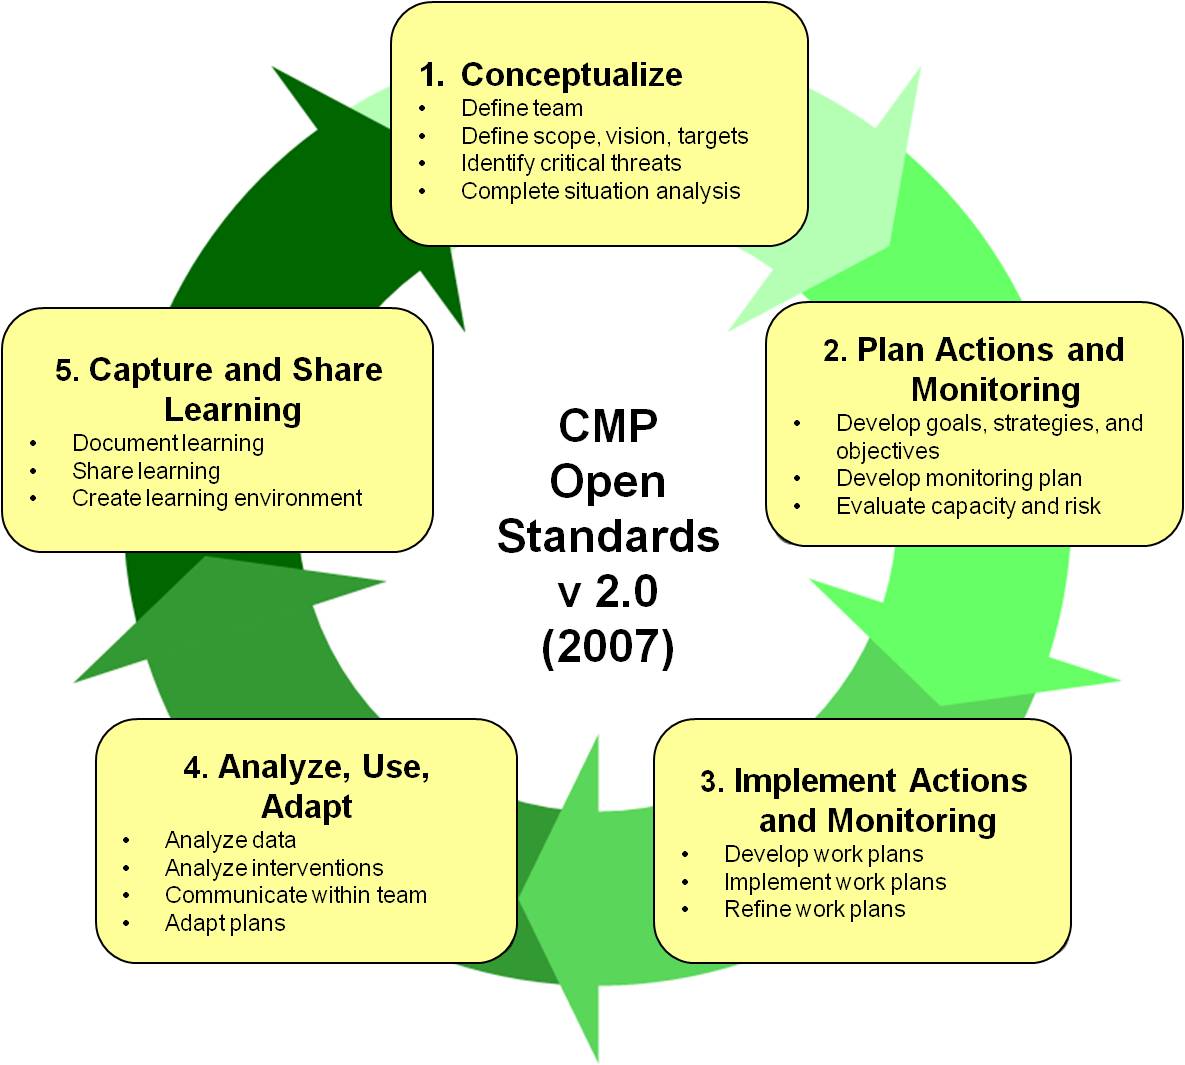 The Open Standards represent a project management cycle with five major steps, which are in turn made up of a total of sixteen basic practices